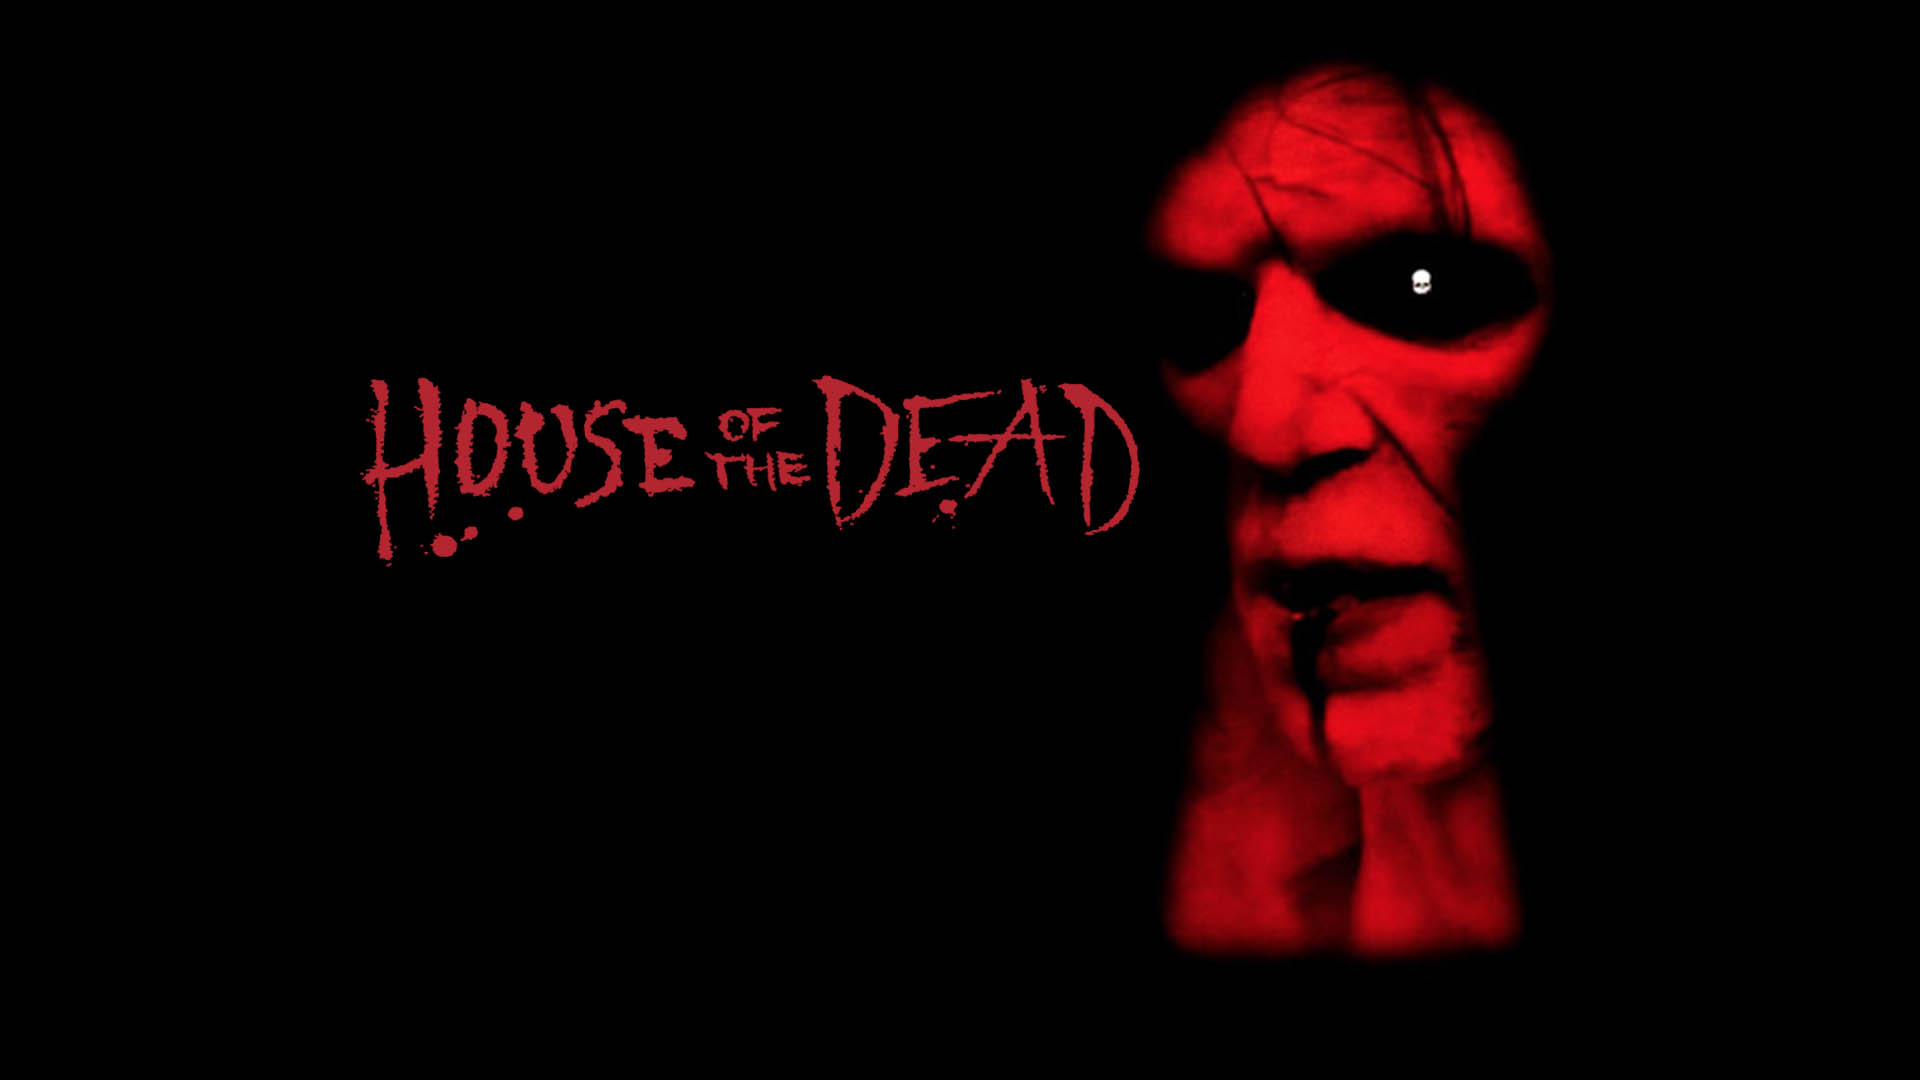 Watch House of the Dead Online | Stream Full Movies